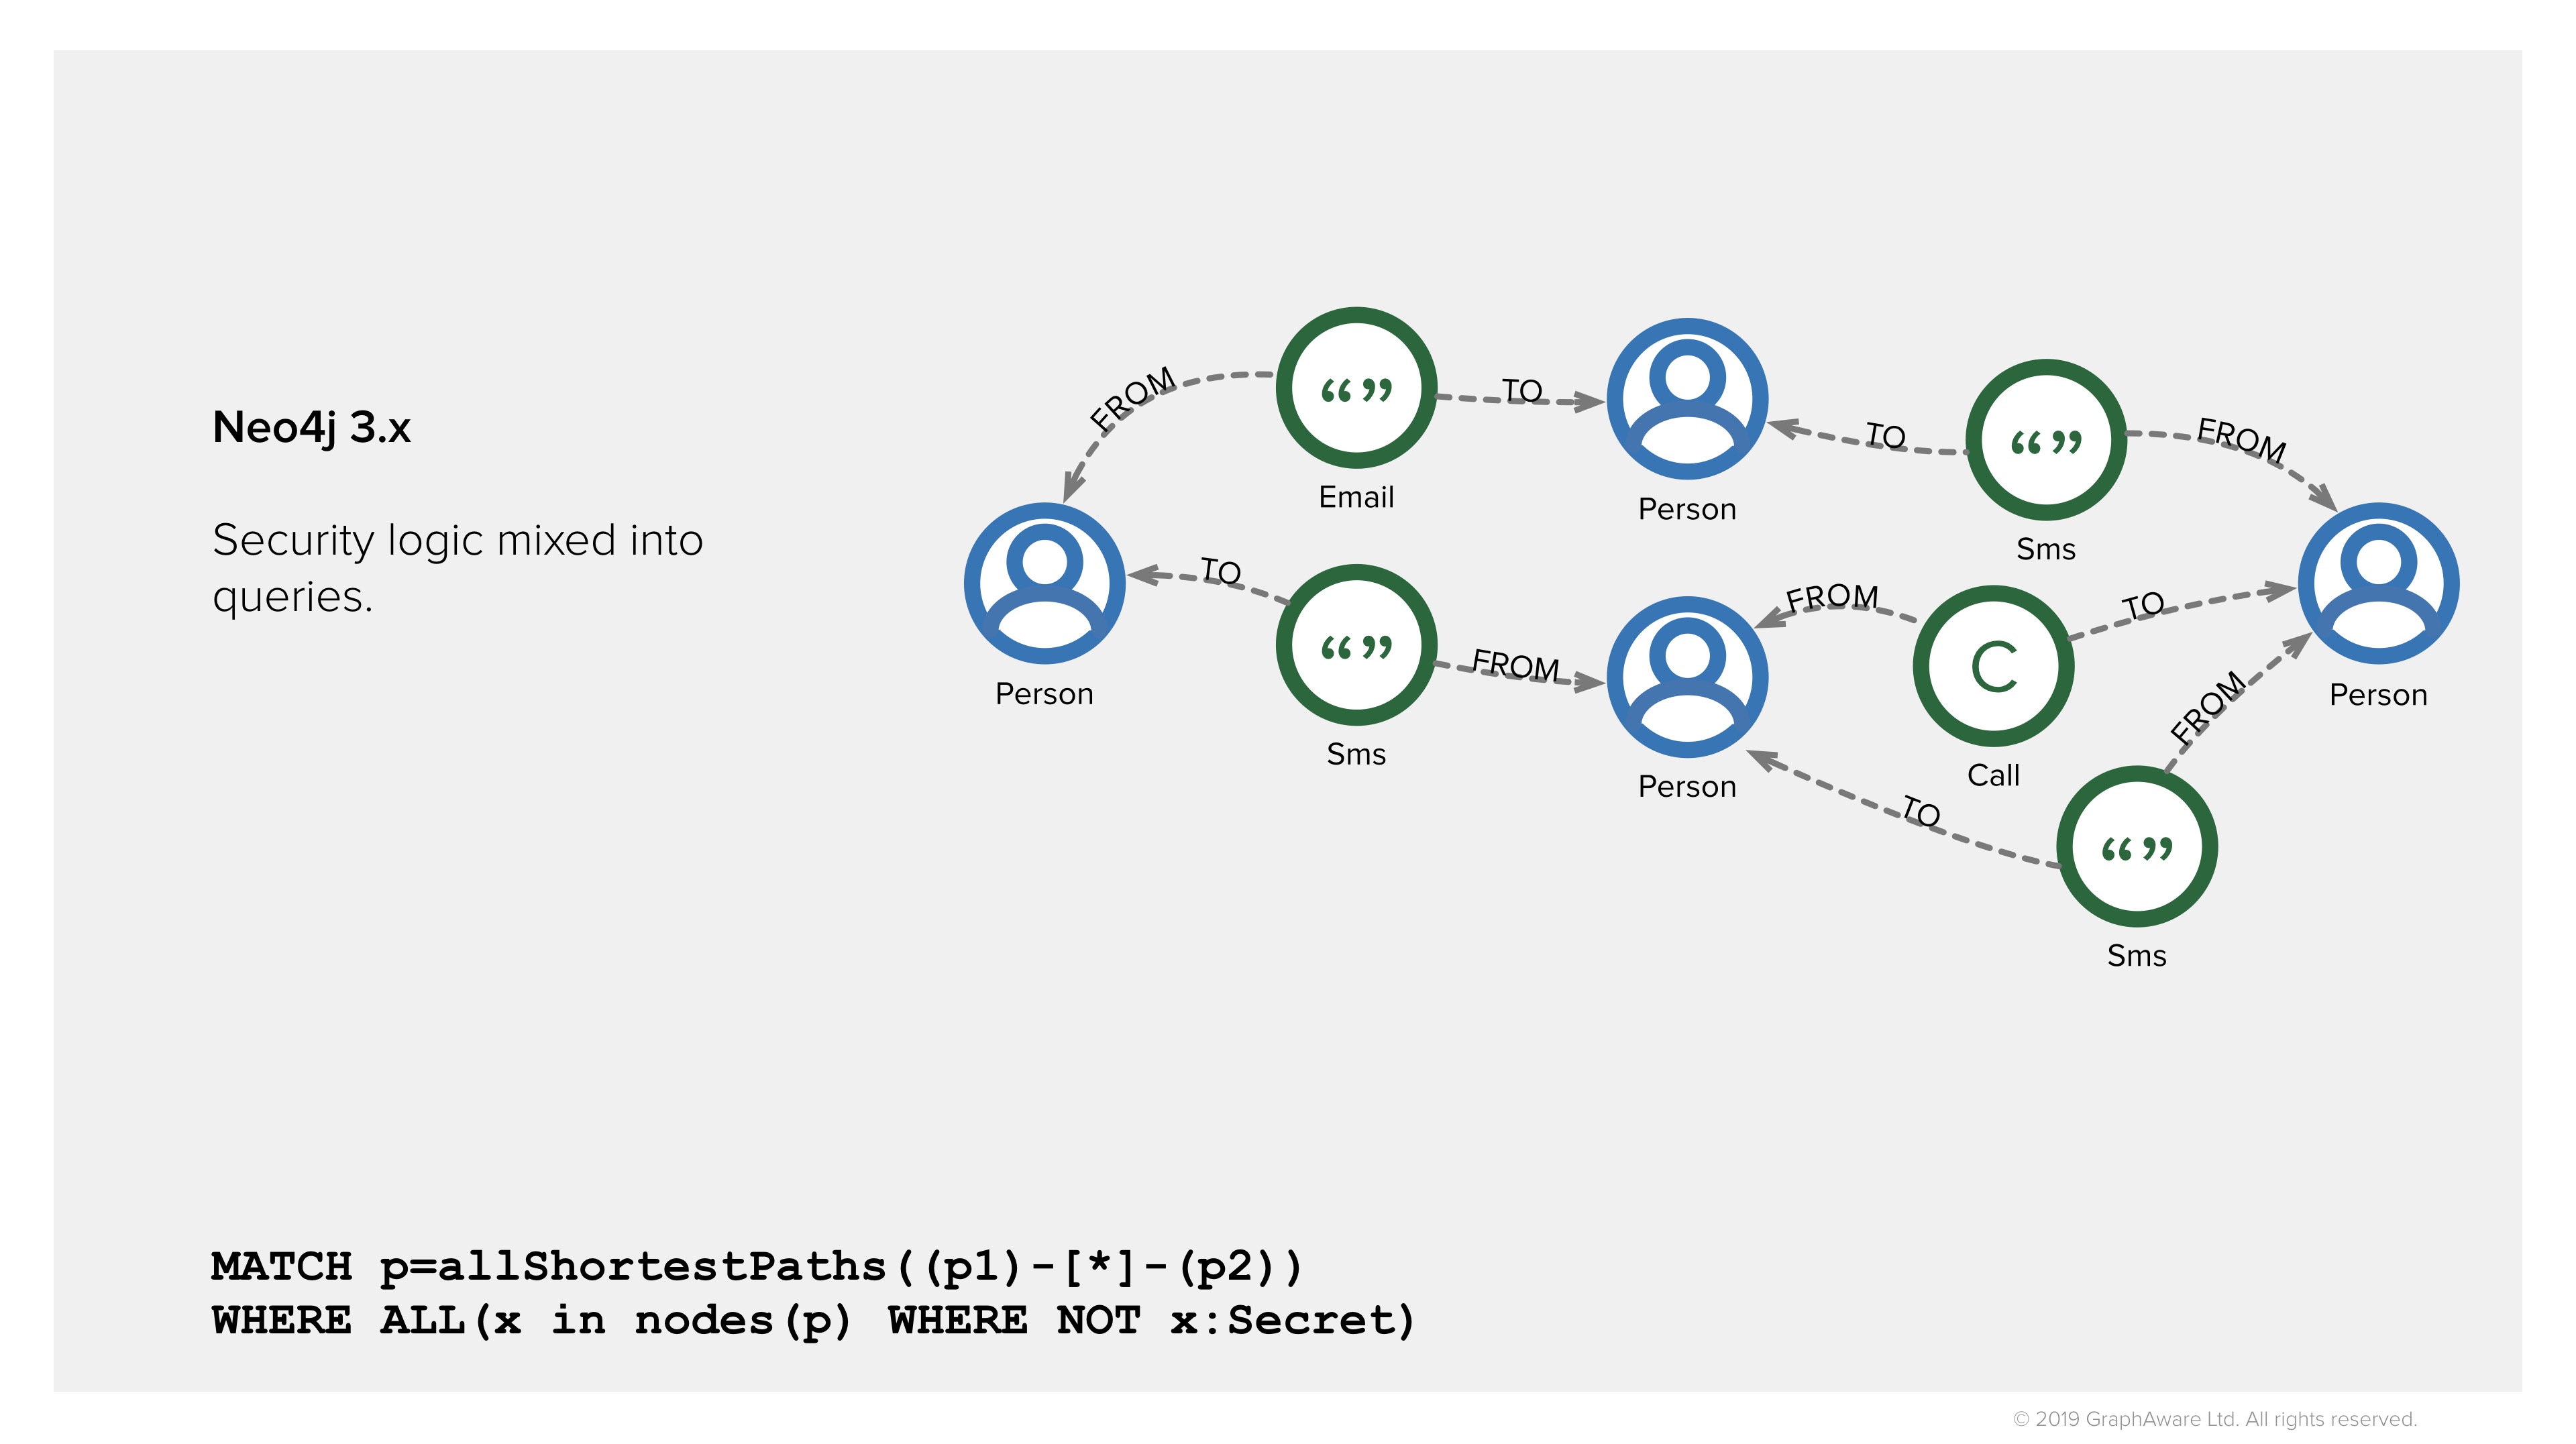 Find shortest paths in Neo4j 3.x for law enforcement - Security logic in queries